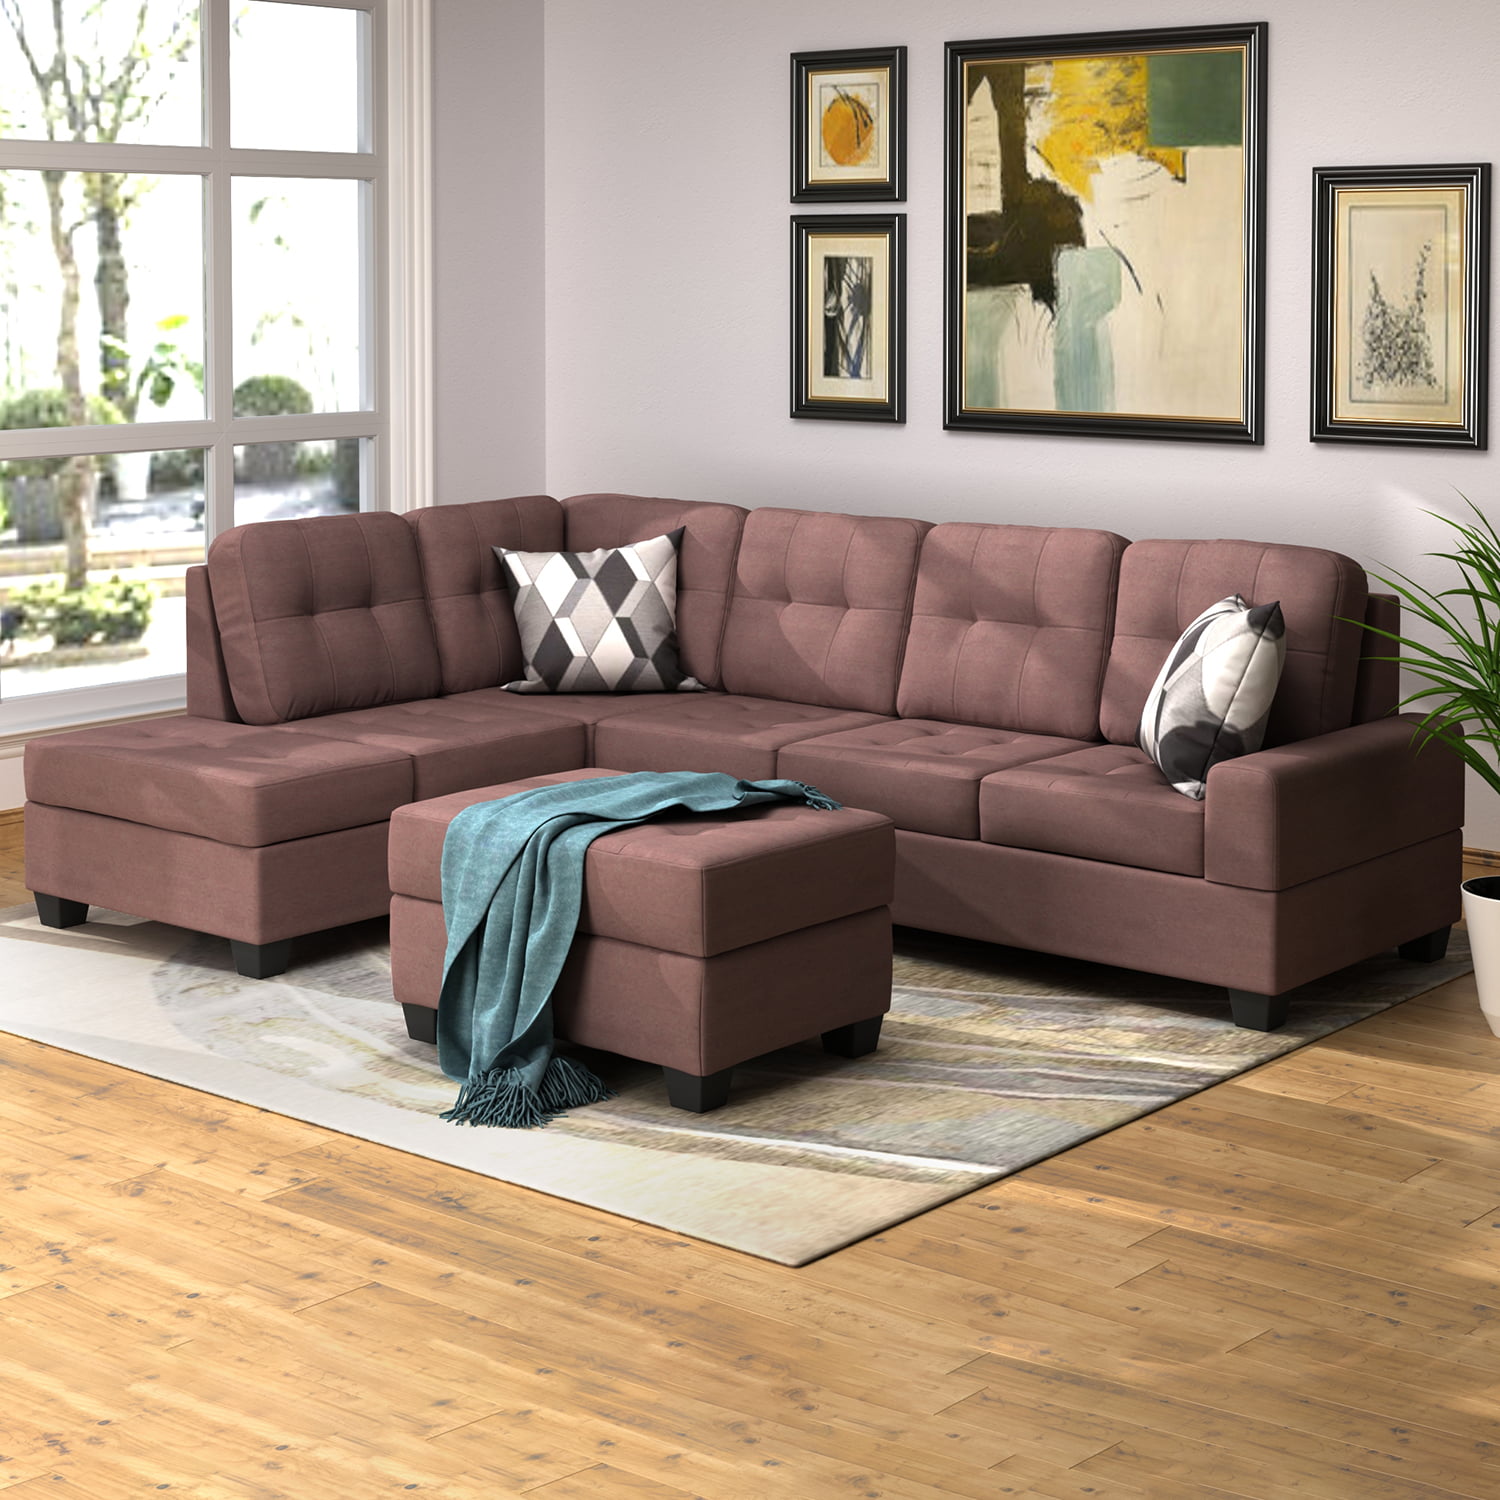 3 Piece Sectional Sofa Microfiber with Reversible Chaise